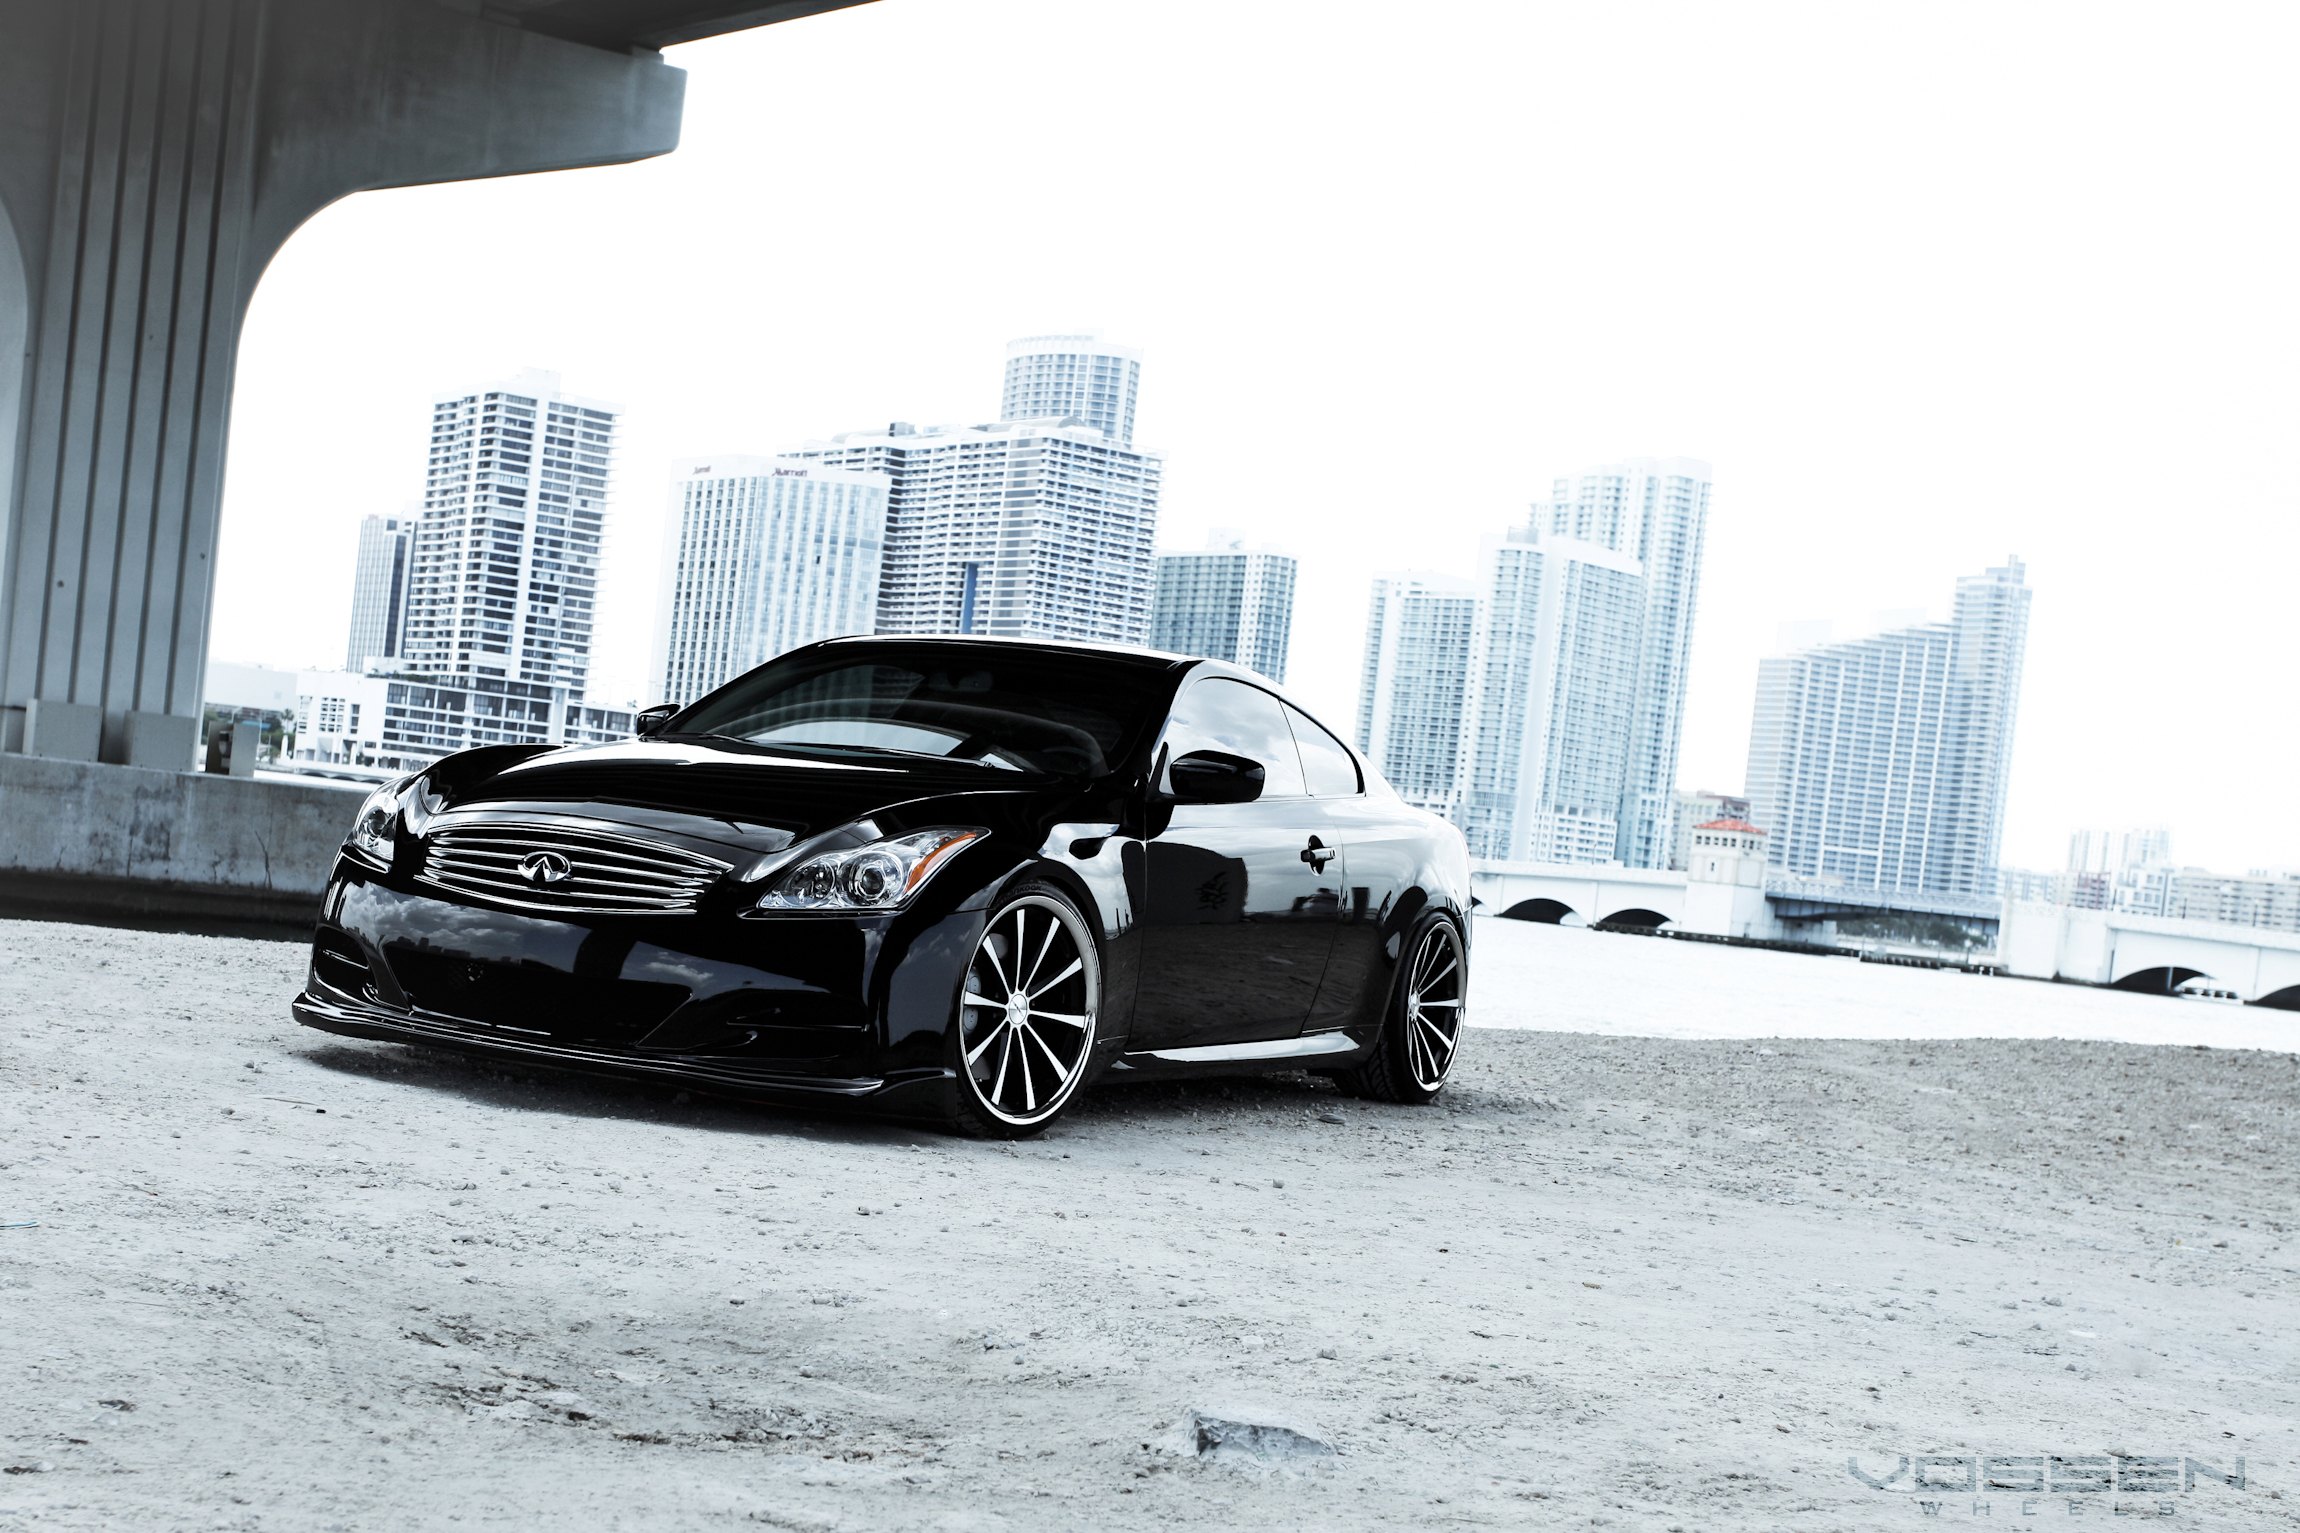 Custom Gloss Black Infiniti G37 with Chrome Grille - Photo by Vossen